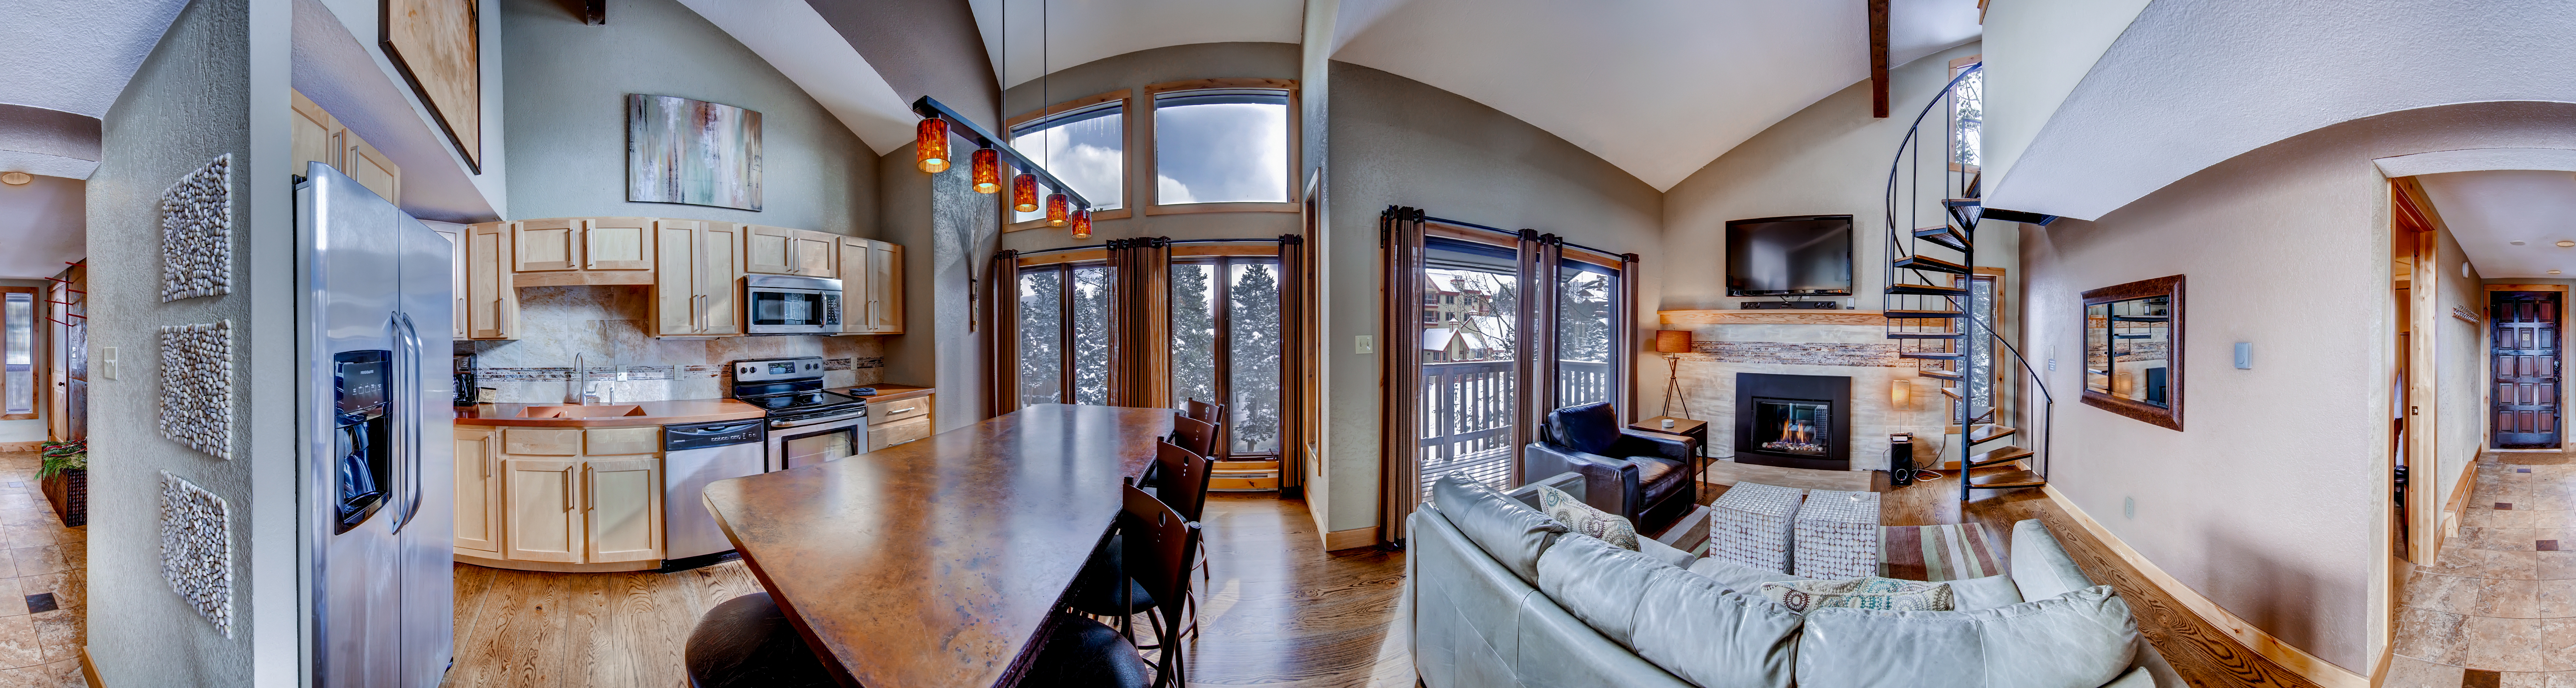 Panoramic view of the kitchen and living areas - 4 O’Clock Lodge A16 Breckenridge Vacation Rental